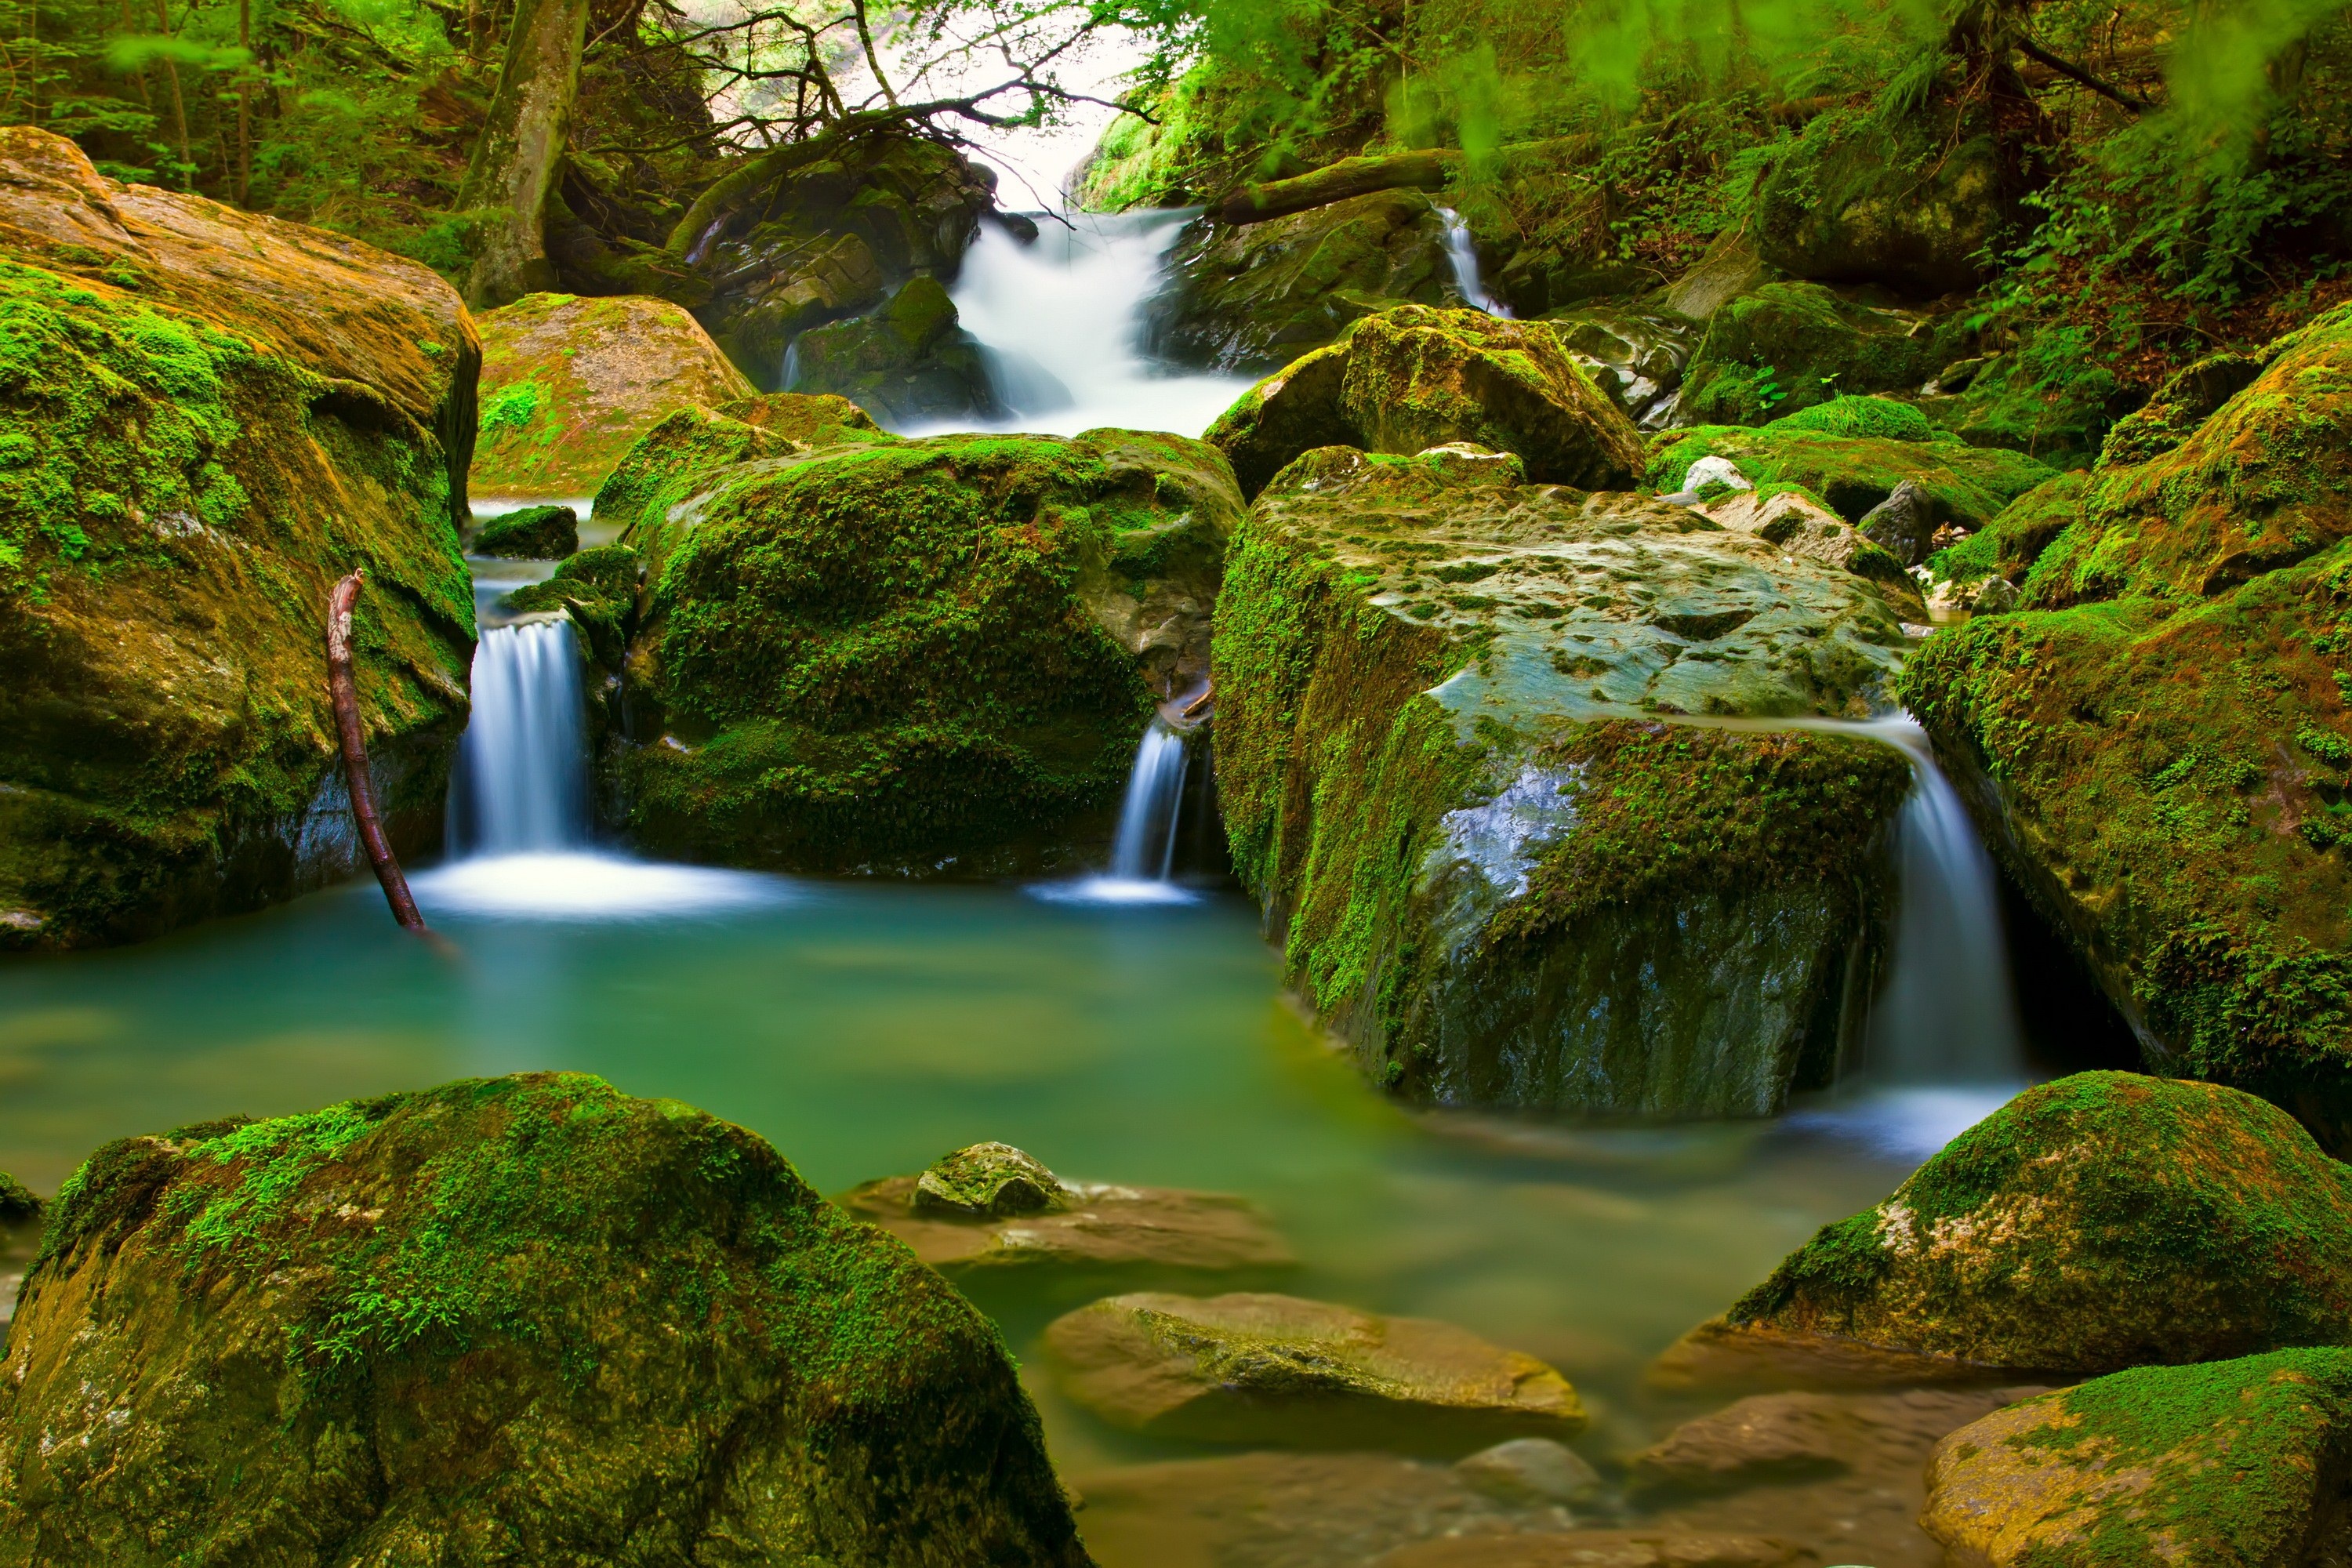  the waterfall wallpapers category of free hd wallpapers waterfalls